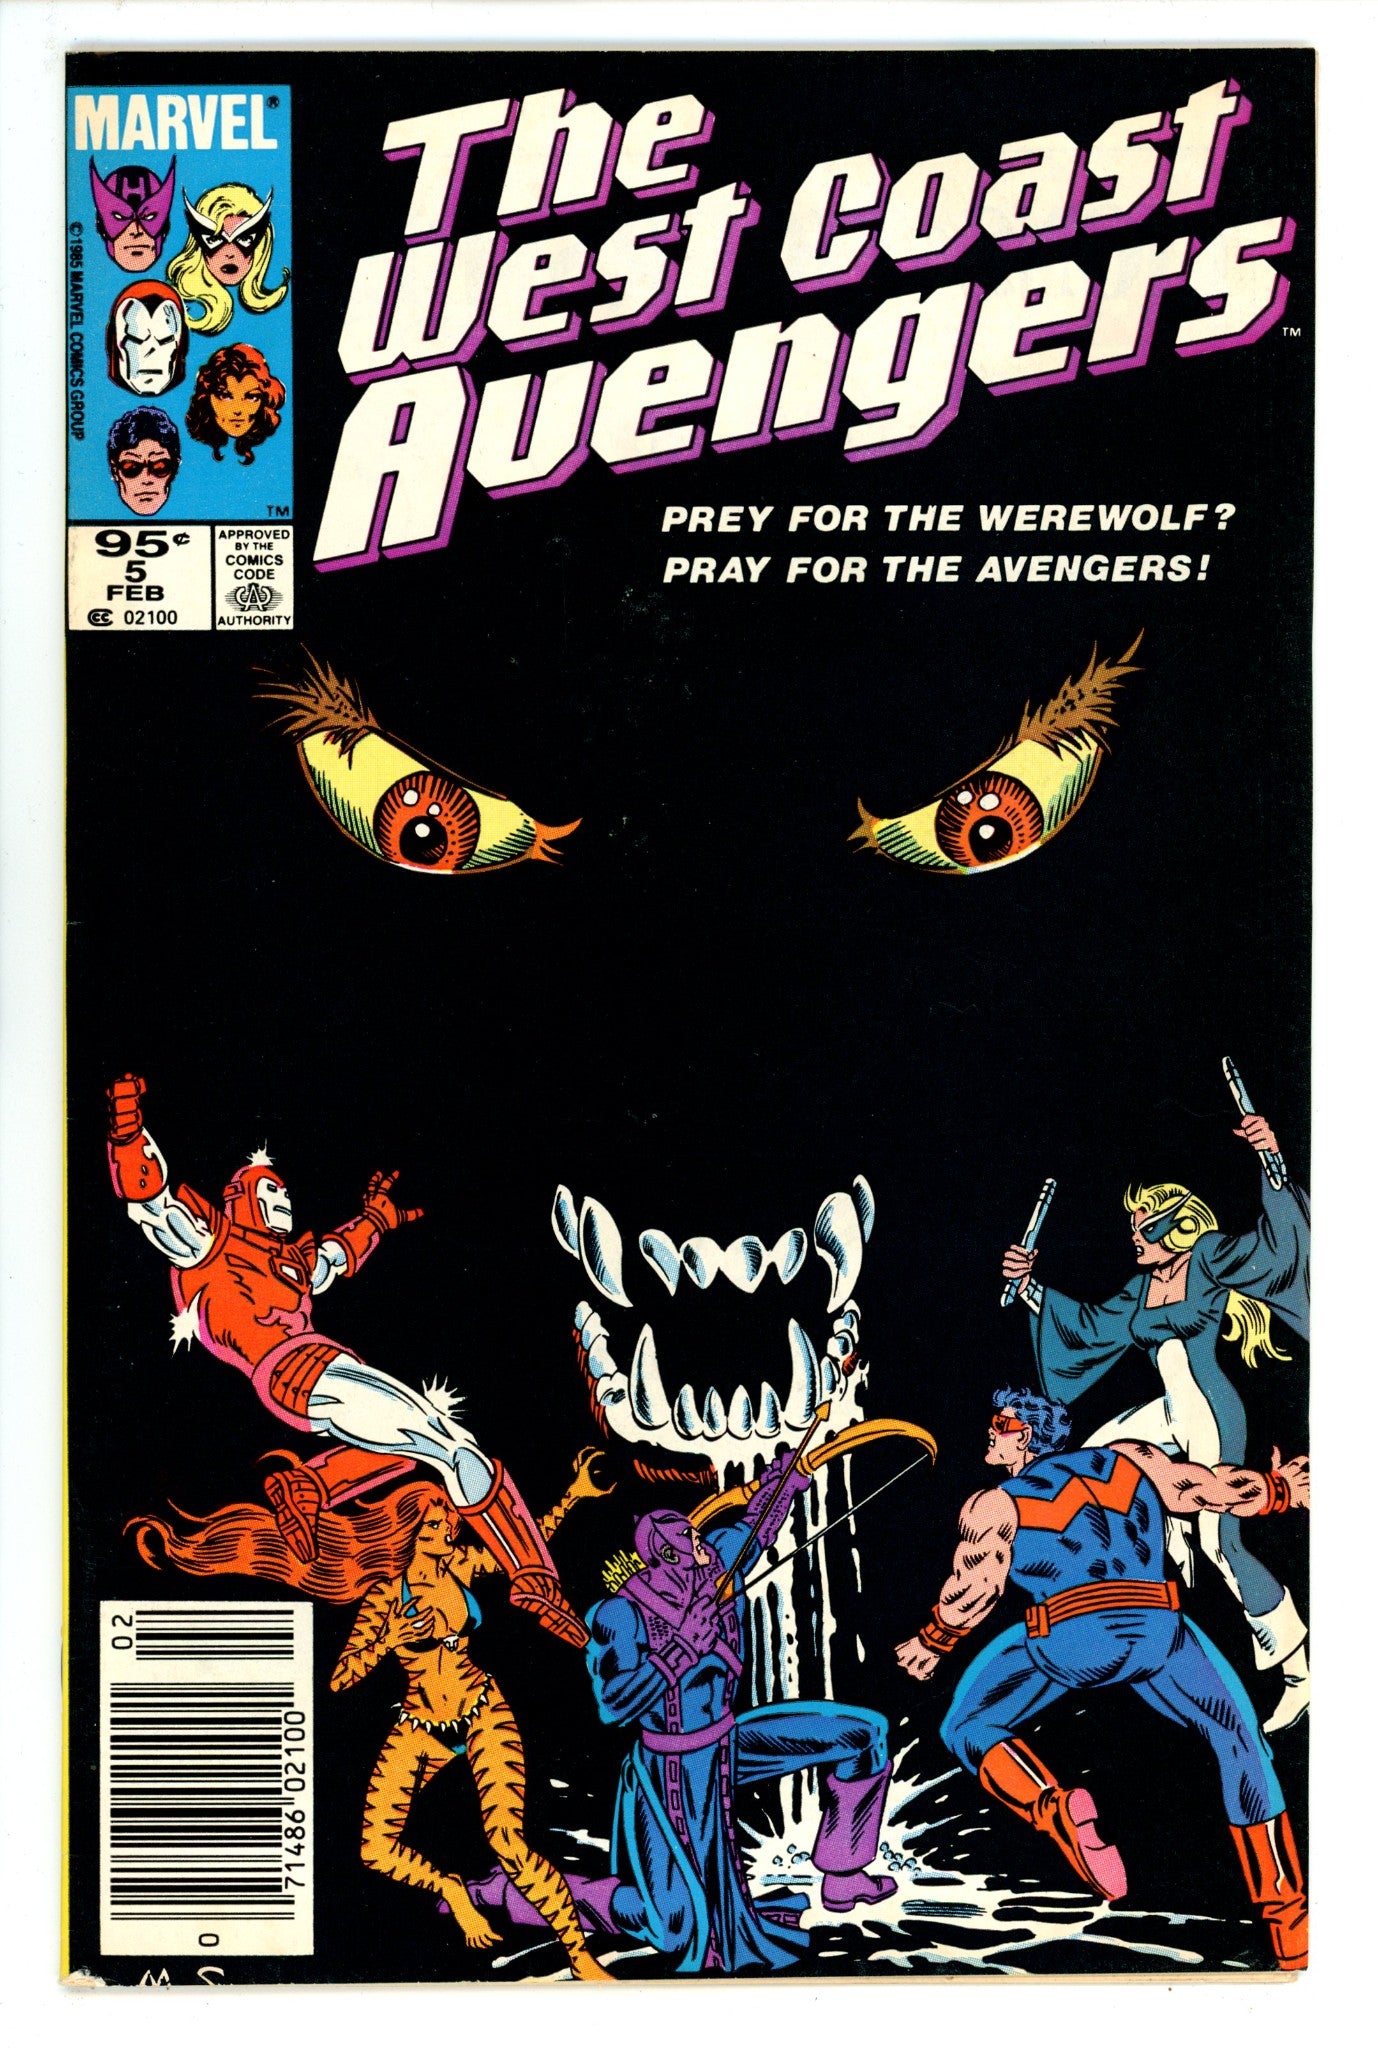 West Coast Avengers Vol 2 5 VF- (7.5) (1986) Canadian Price Variant 